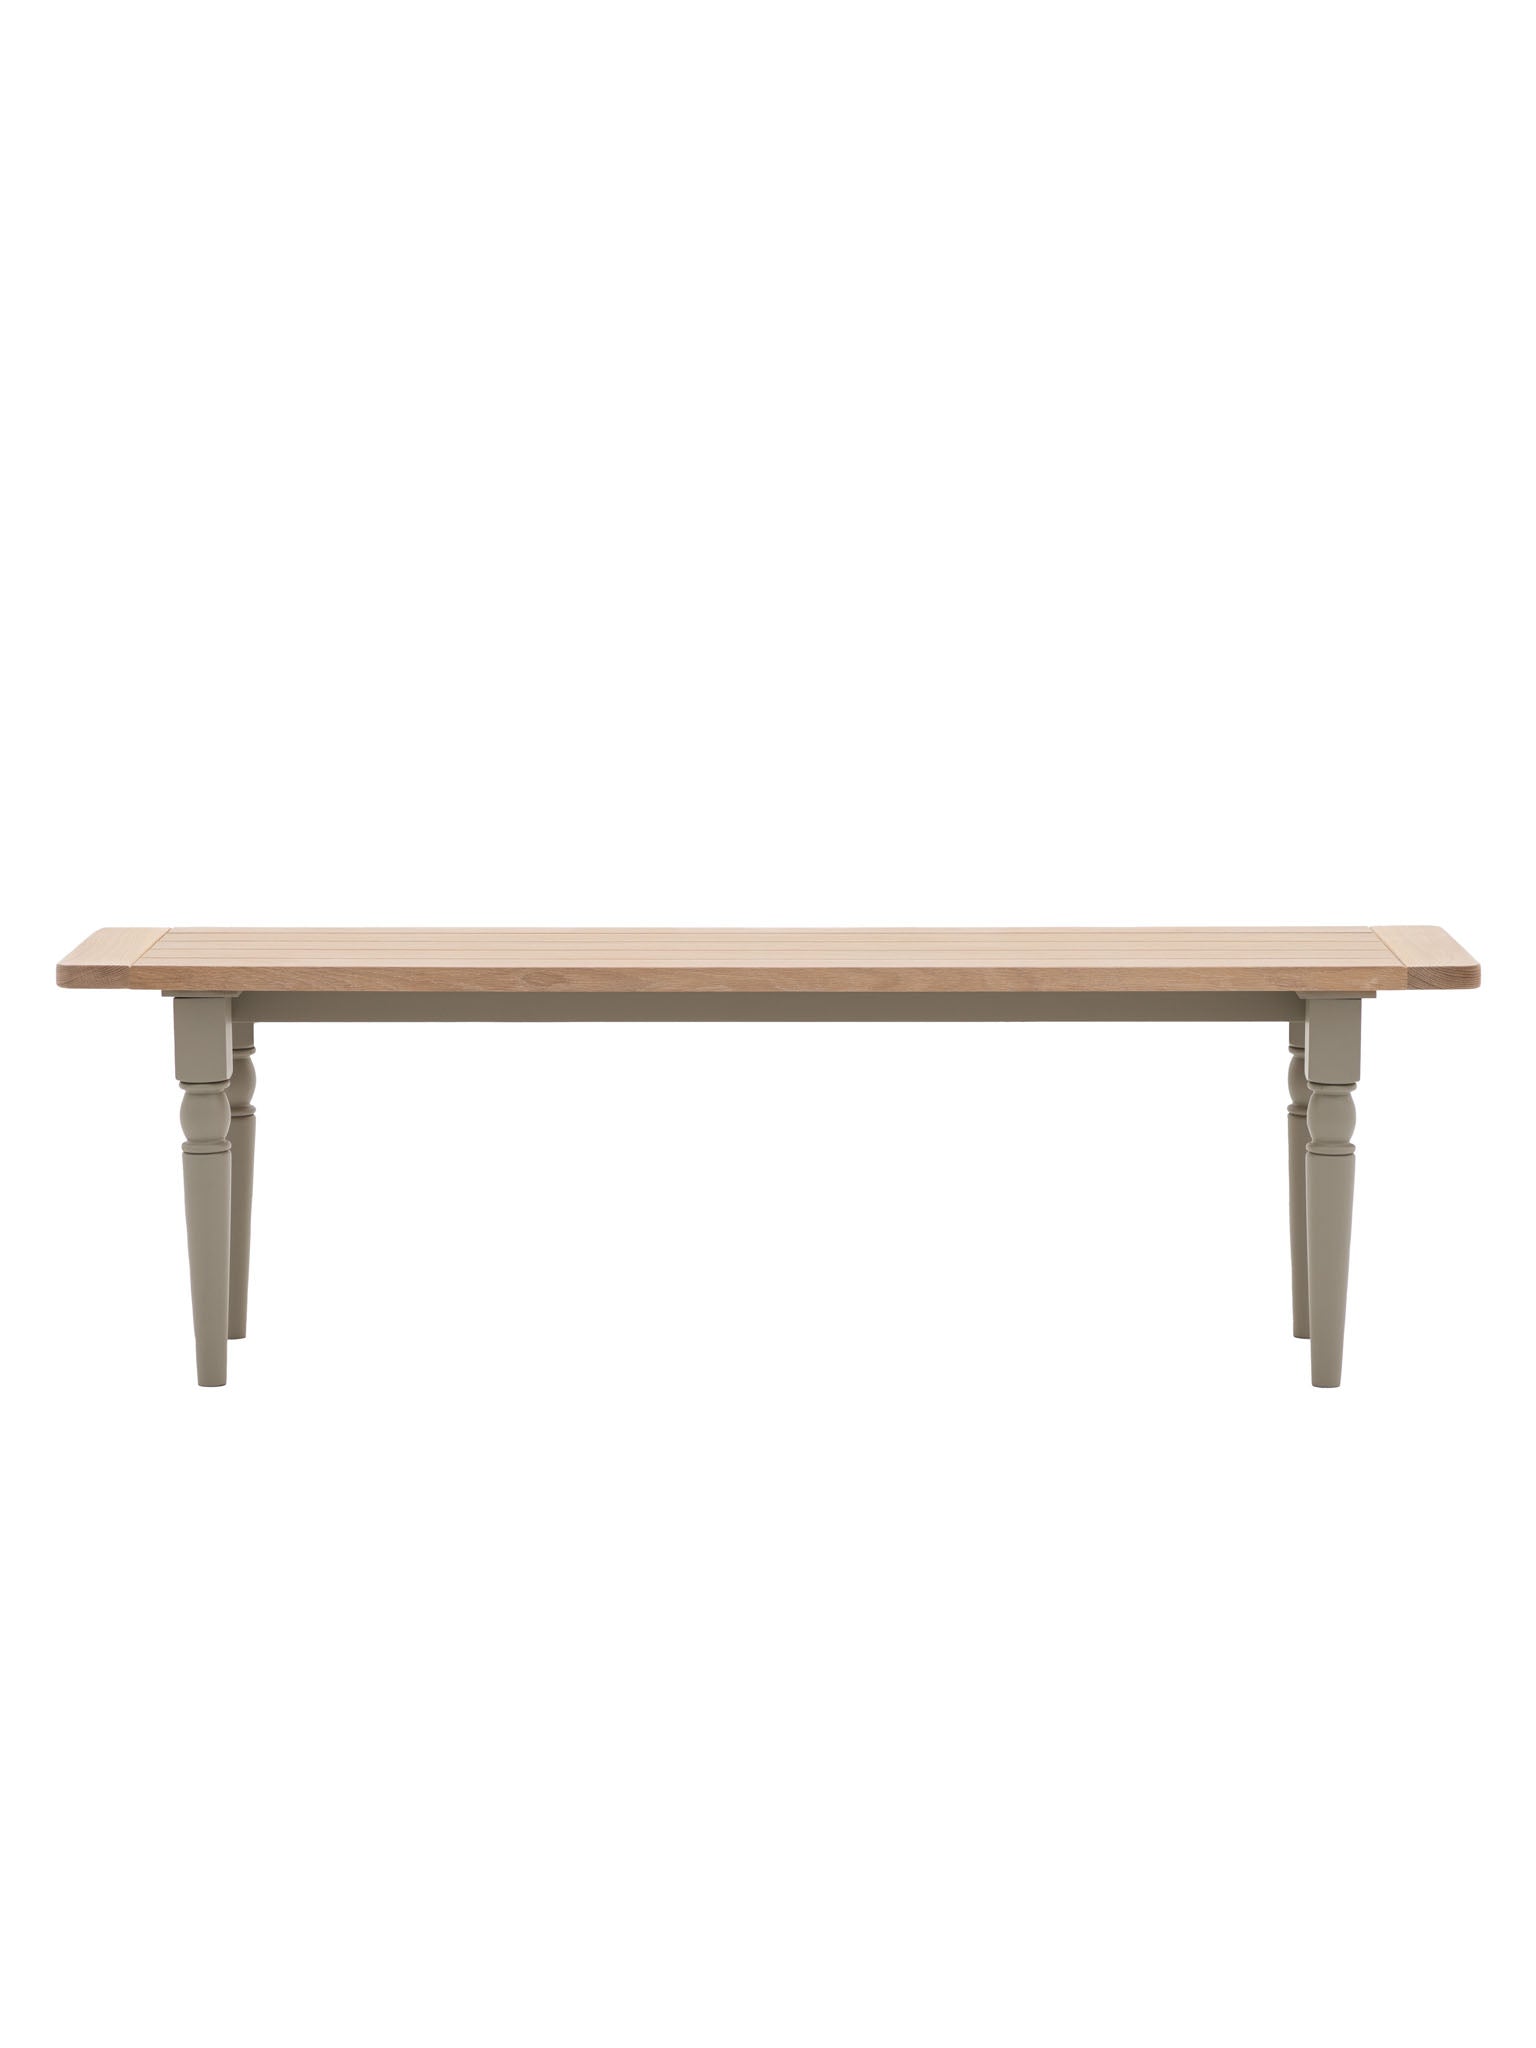 Farmhouse Style Oak top Dining Bench painted in prairie